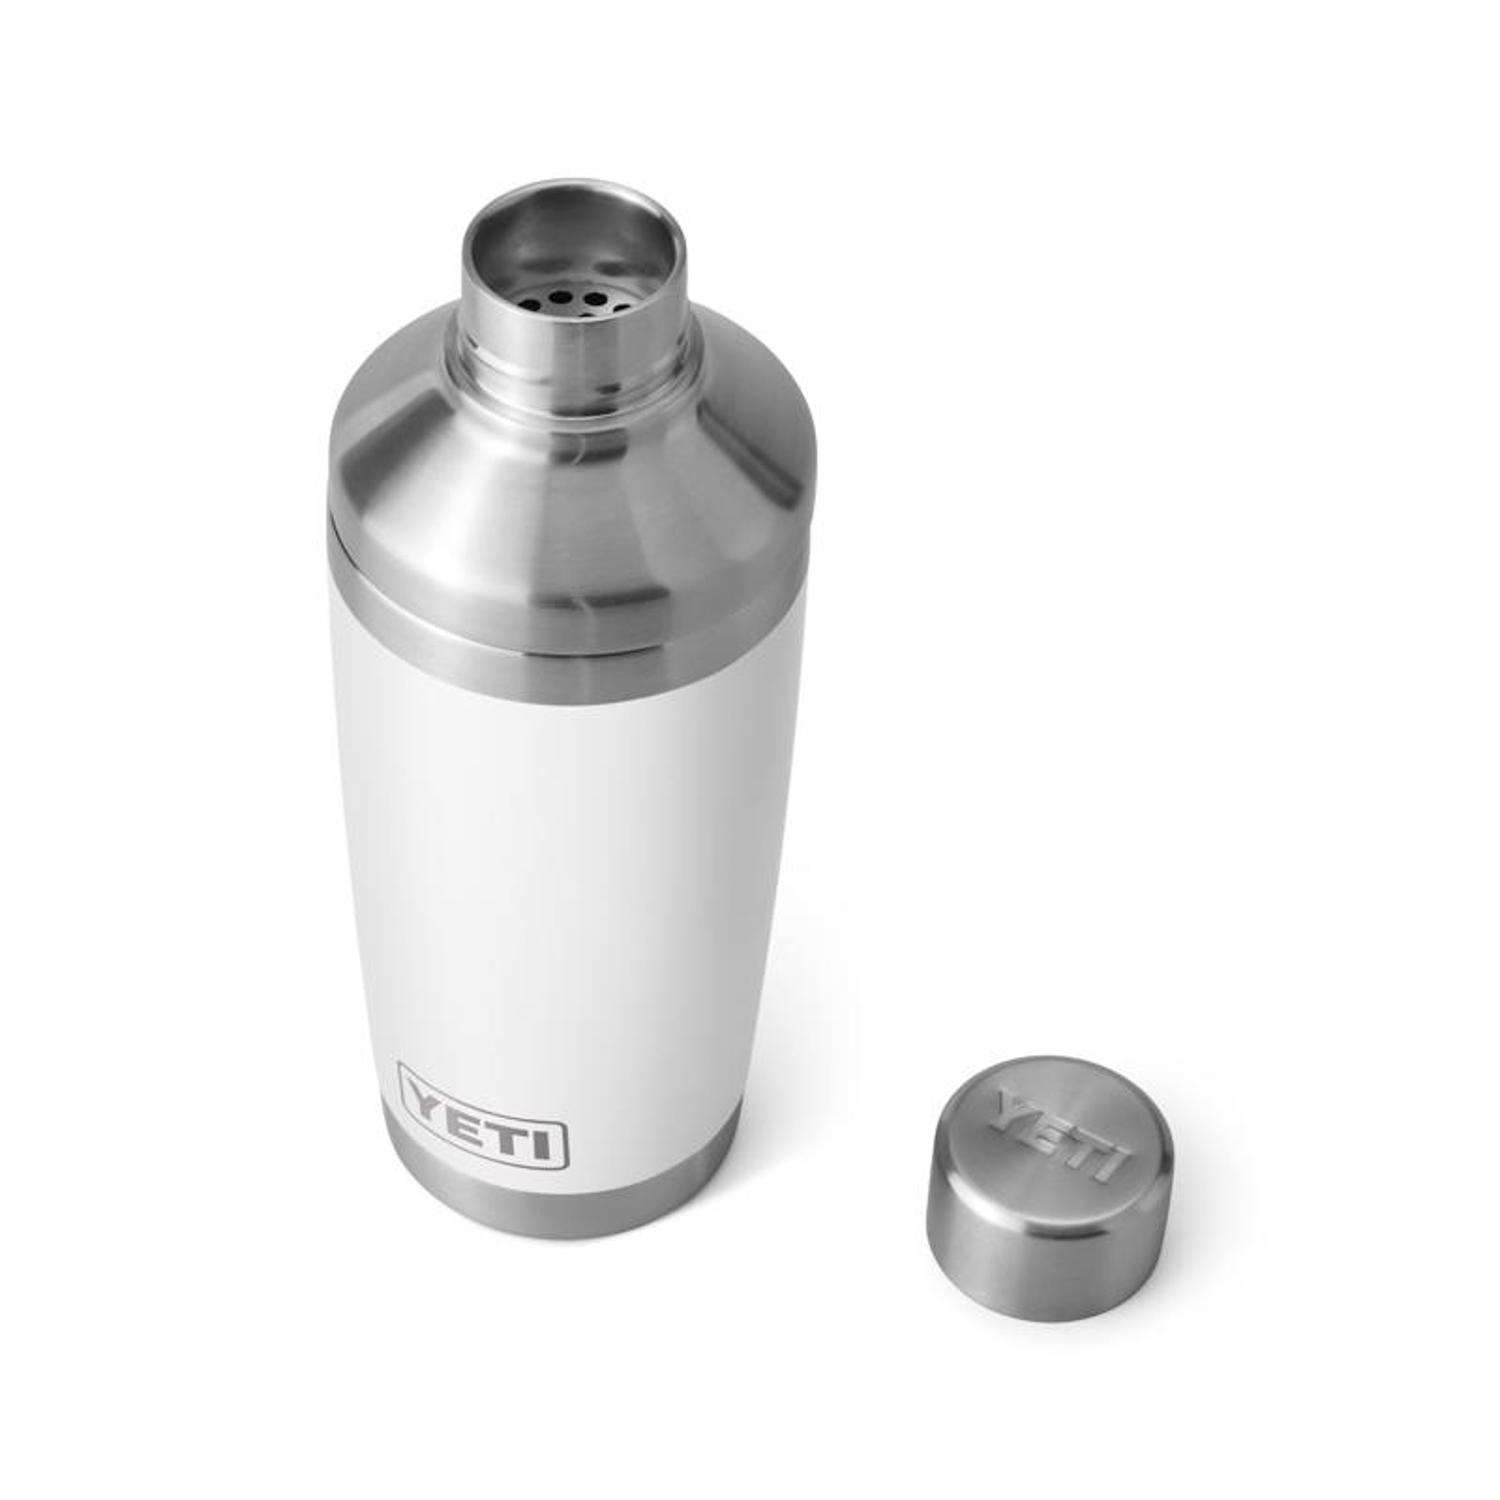 Yeti to Release a Cocktail Shaker, More Soft Cooler and Dry Bag